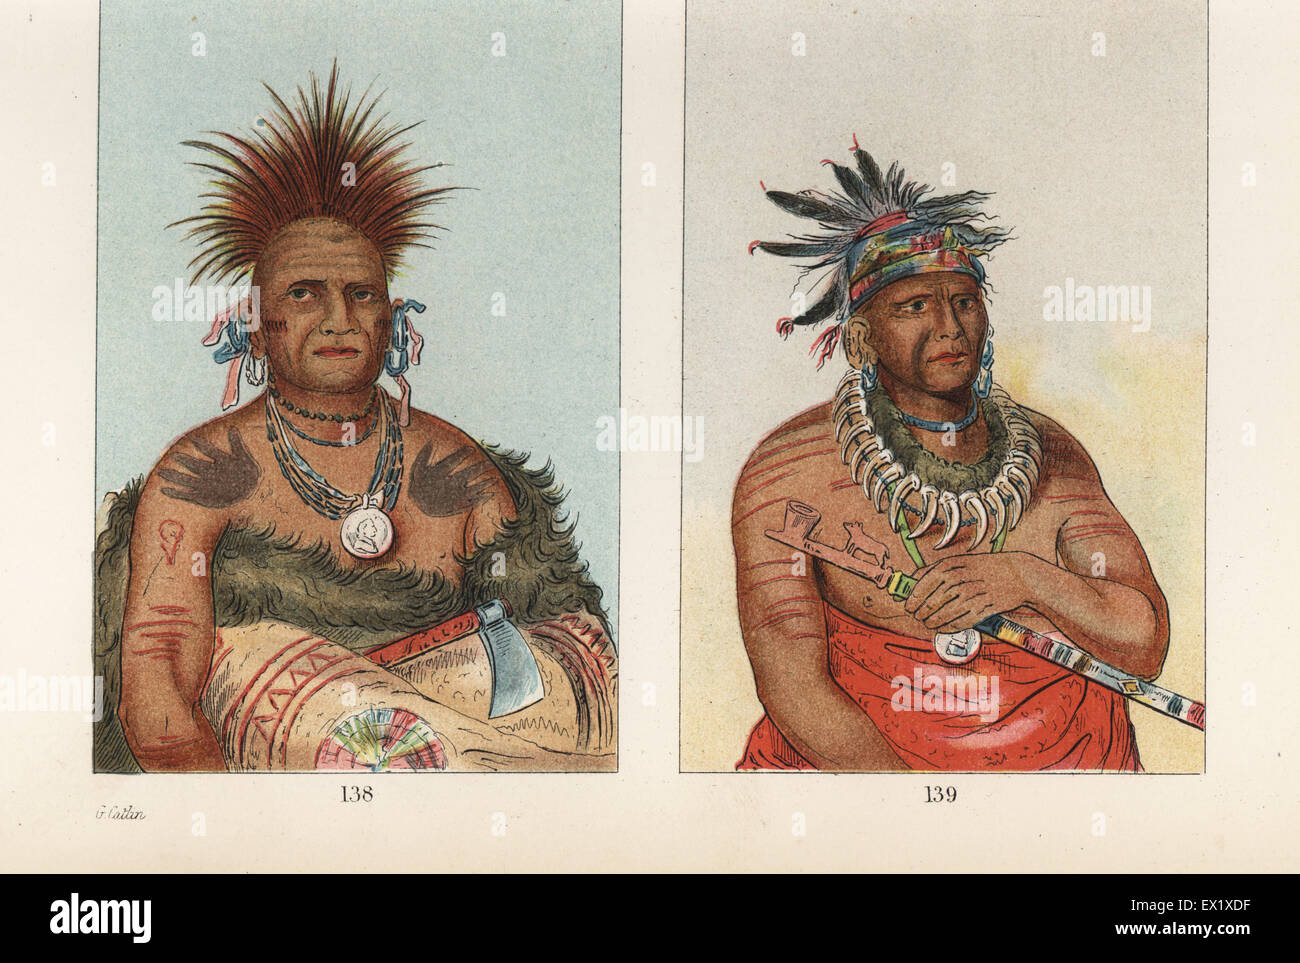 Shon-ka-ki-he-ga, Horse Chief of the Grand Pawnee nation 138, and Haw-che-ke-sug-ga, He Who Kills the Osage, aged chief of the Missouries (Missouria or Niuachi) 139. Handcoloured lithograph from George Catlin's Manners, Customs and Condition of the North American Indians, London, 1841. Stock Photo